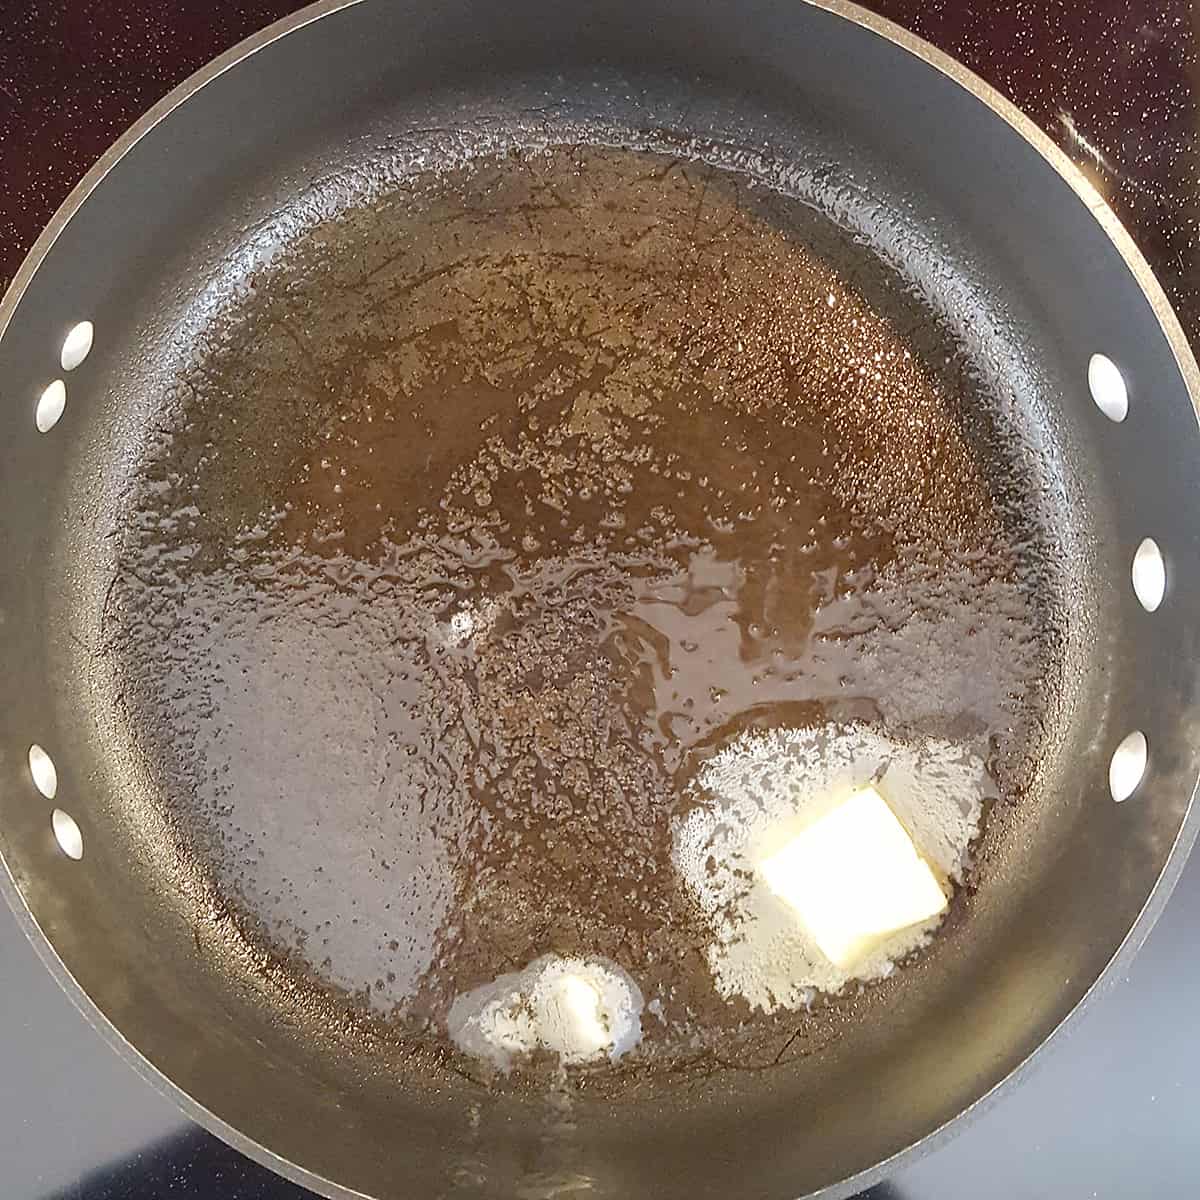 Skillet with butter and oil melting.